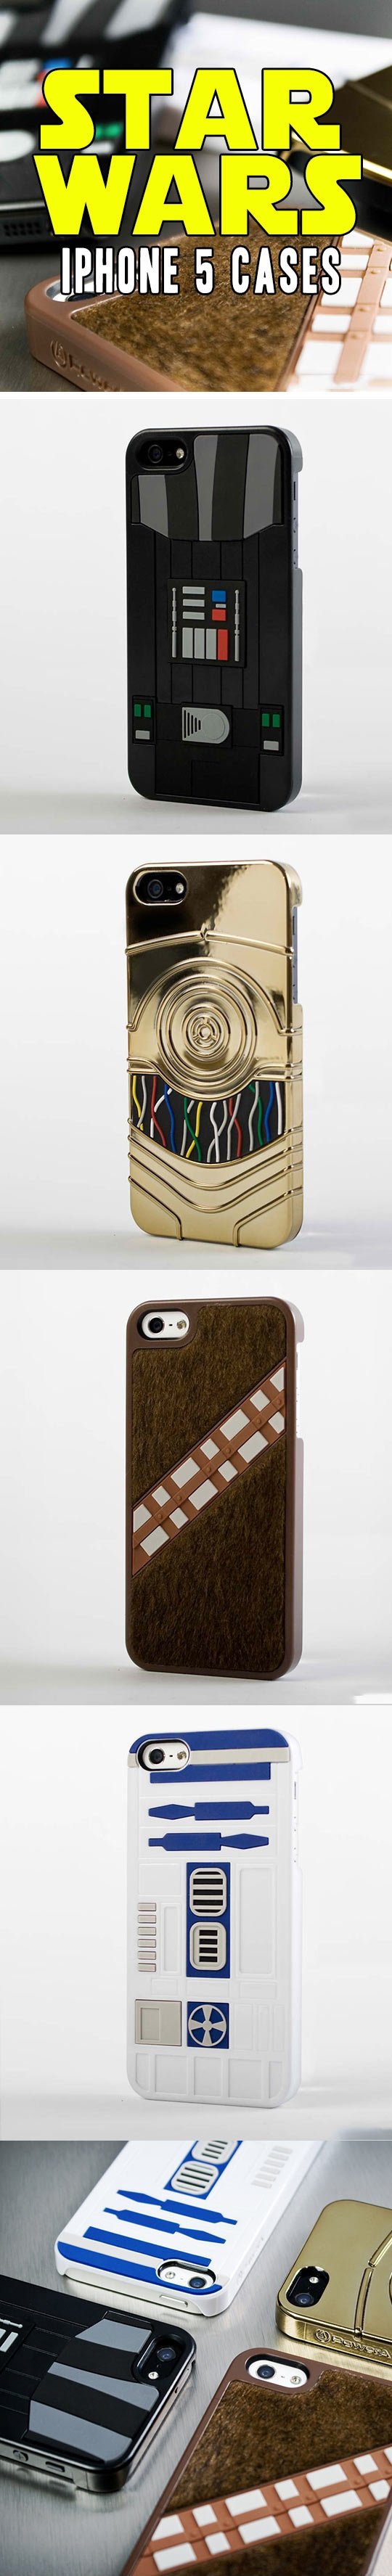 Star Wars iPhone cases.